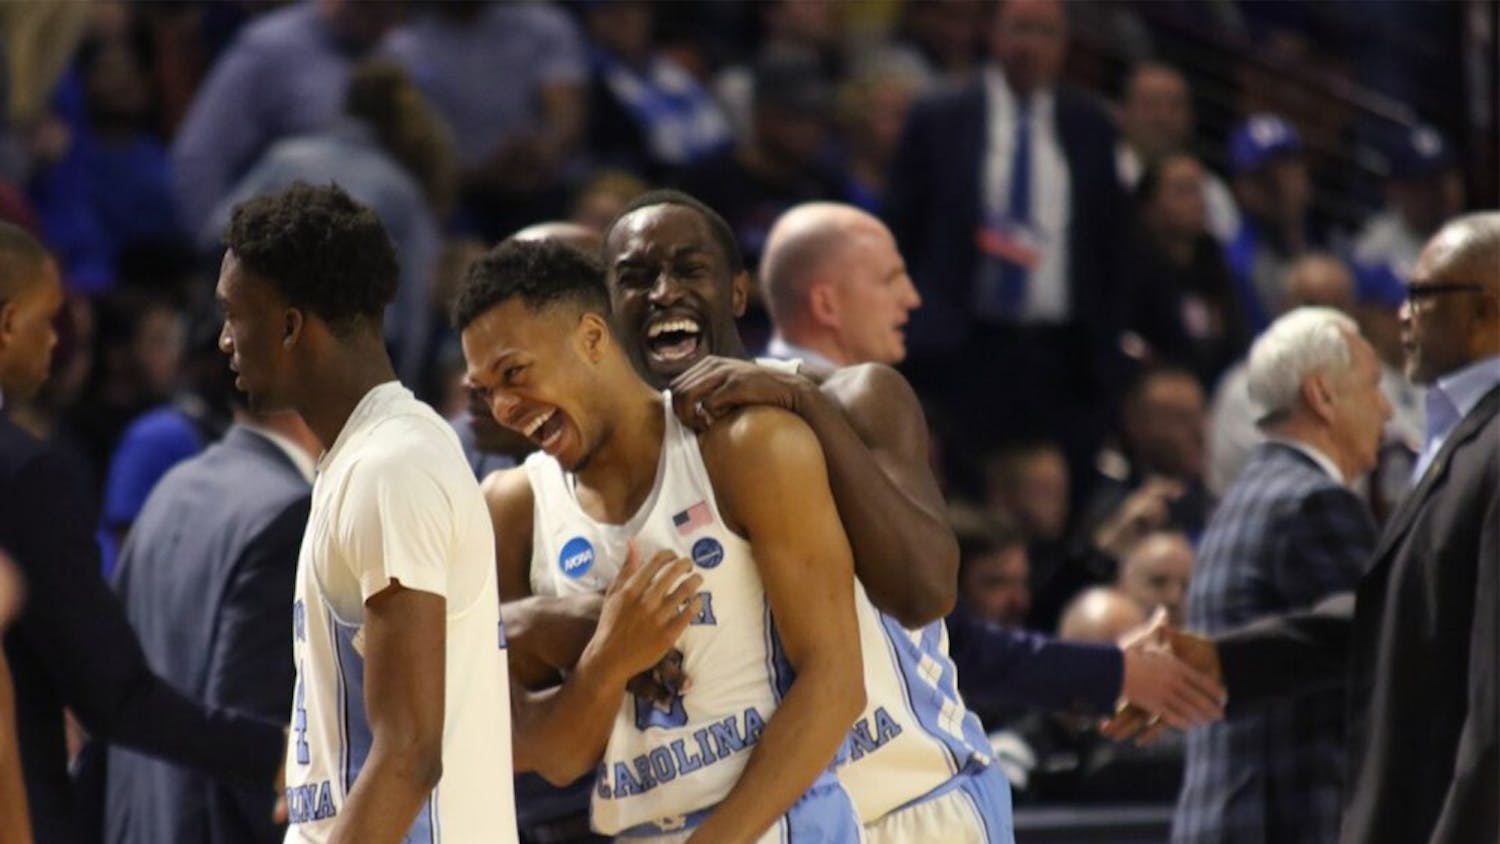 North Carolina wing Theo Pinson (1) and guard Nate Britt (0) celebrate after defeating Arkansas in the second round of the NCAA Tournament in Greenville on Sunday.&nbsp;Trailing 65-60 with 3:28 left, UNC closed the game on a 12-0 run to beat Arkansas.